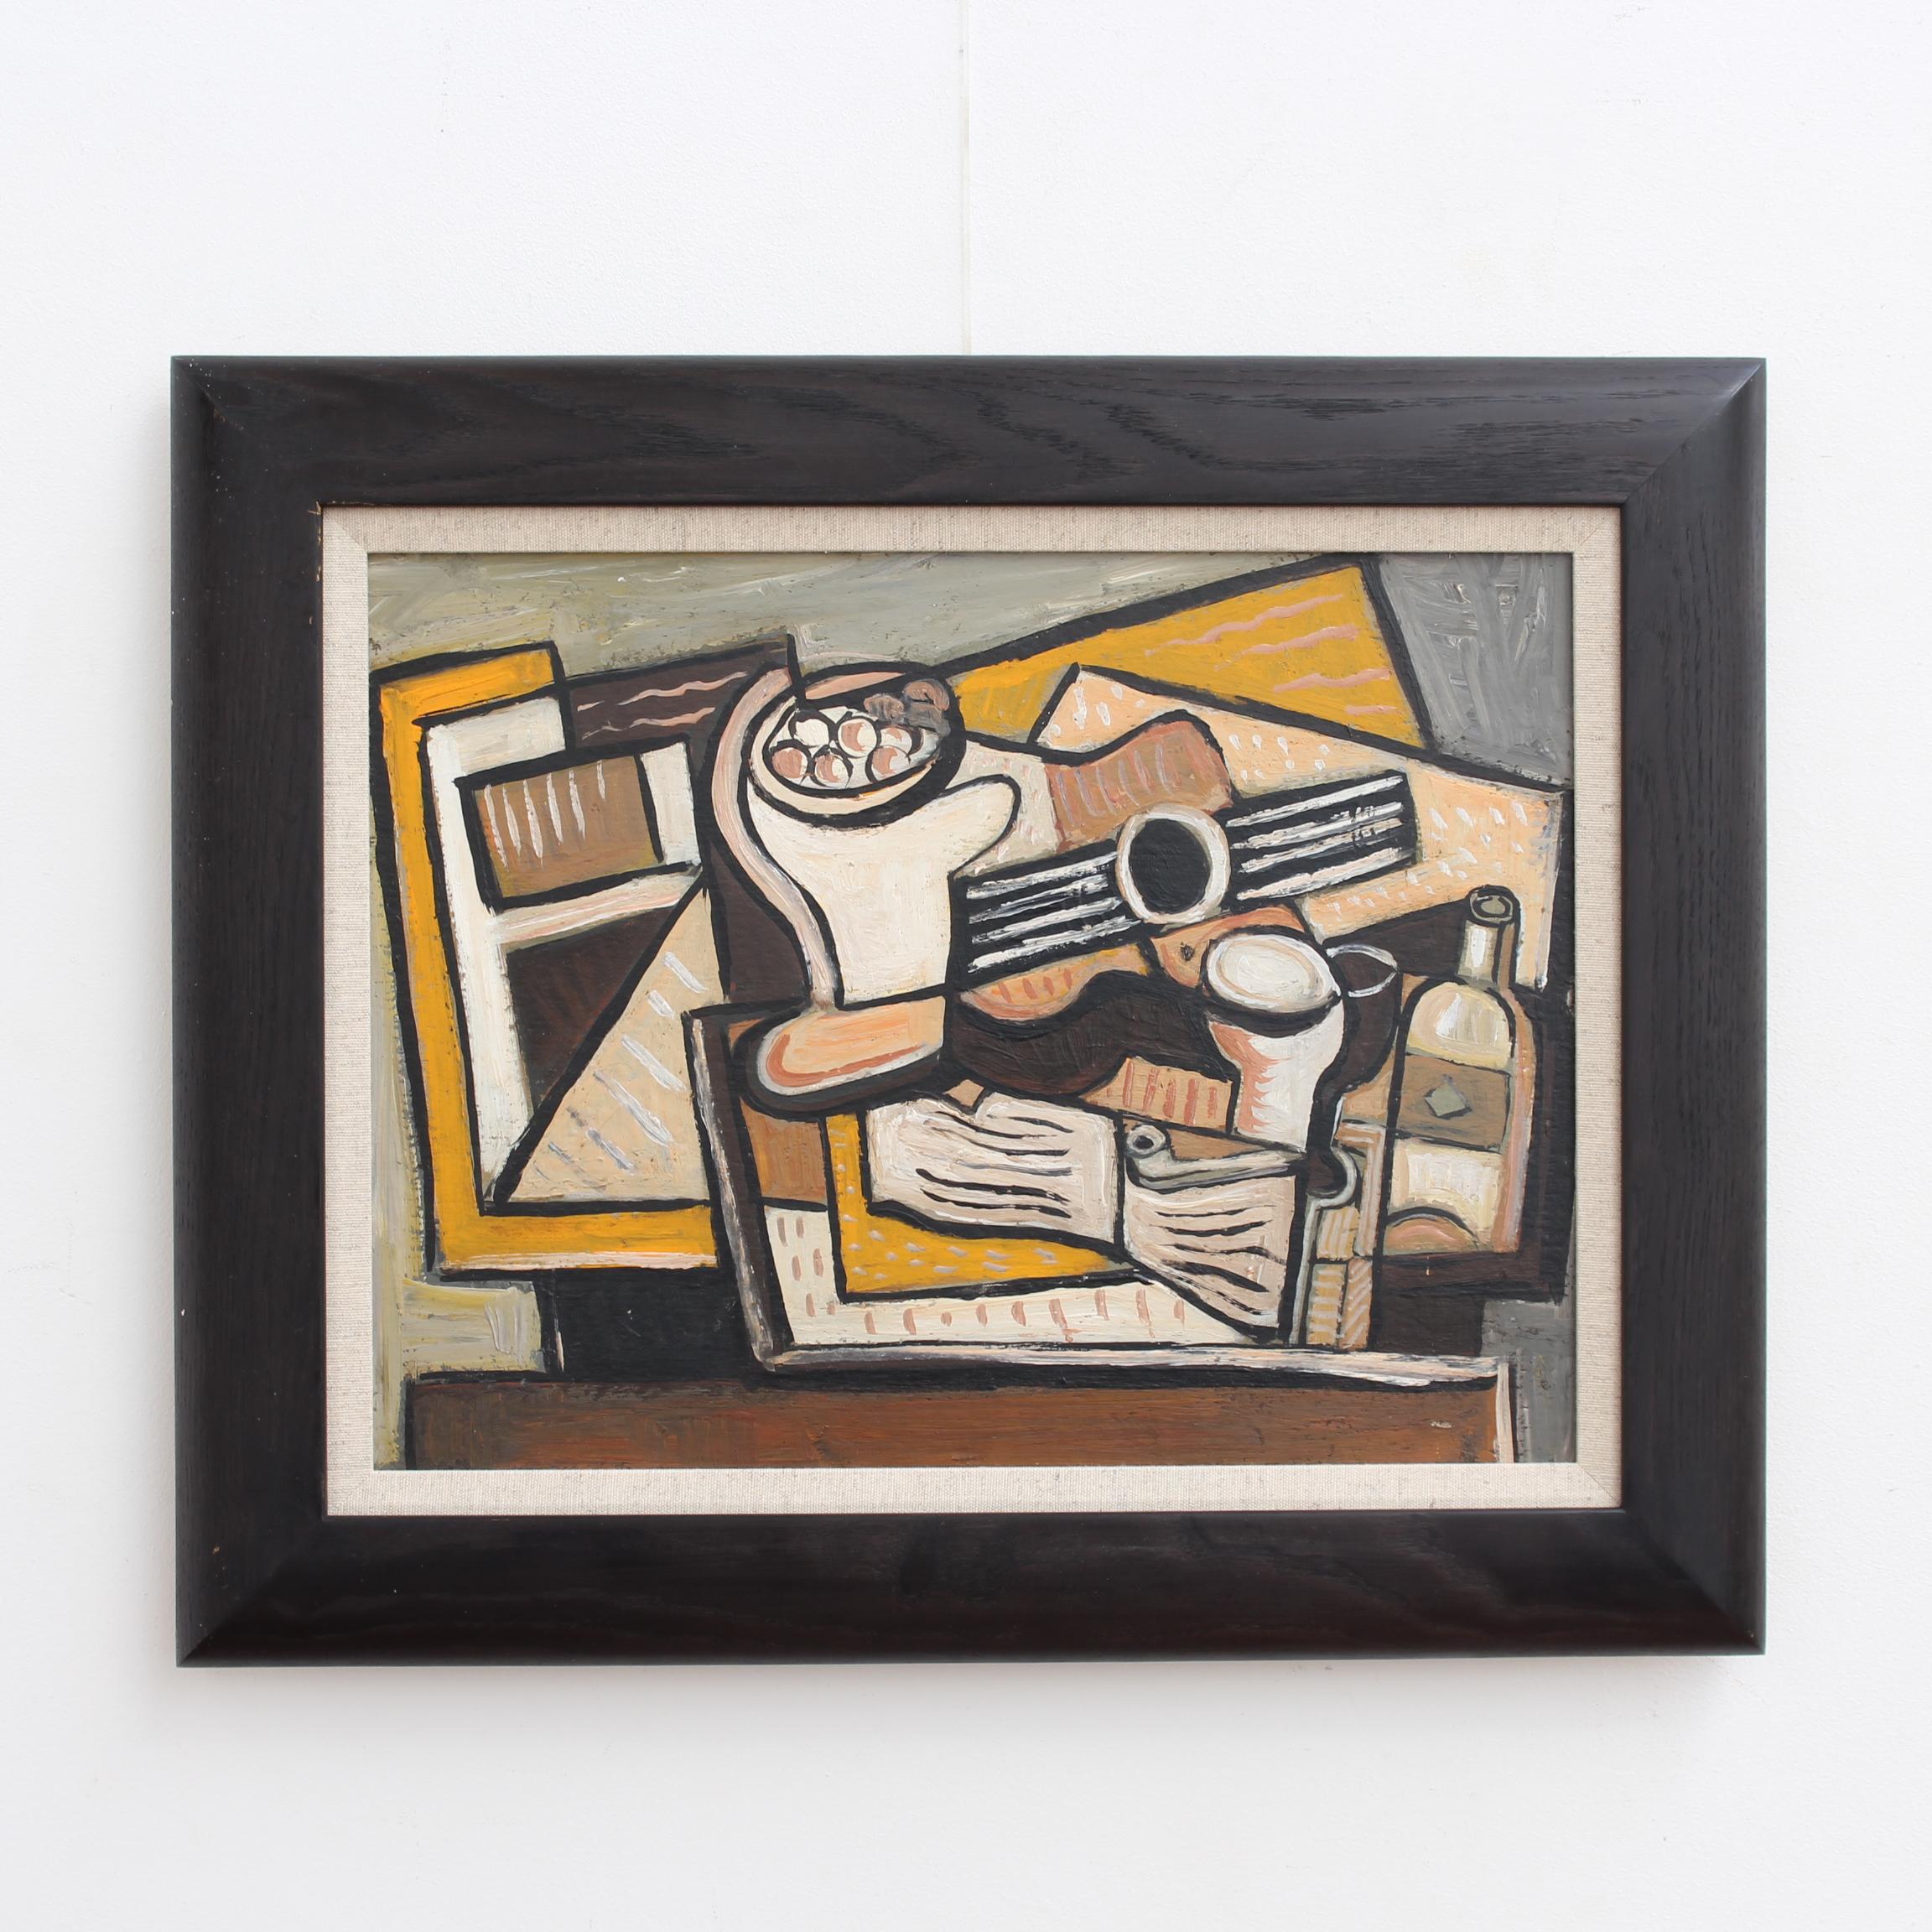 'Cubist Still Life', School of Berlin - Painting by Unknown